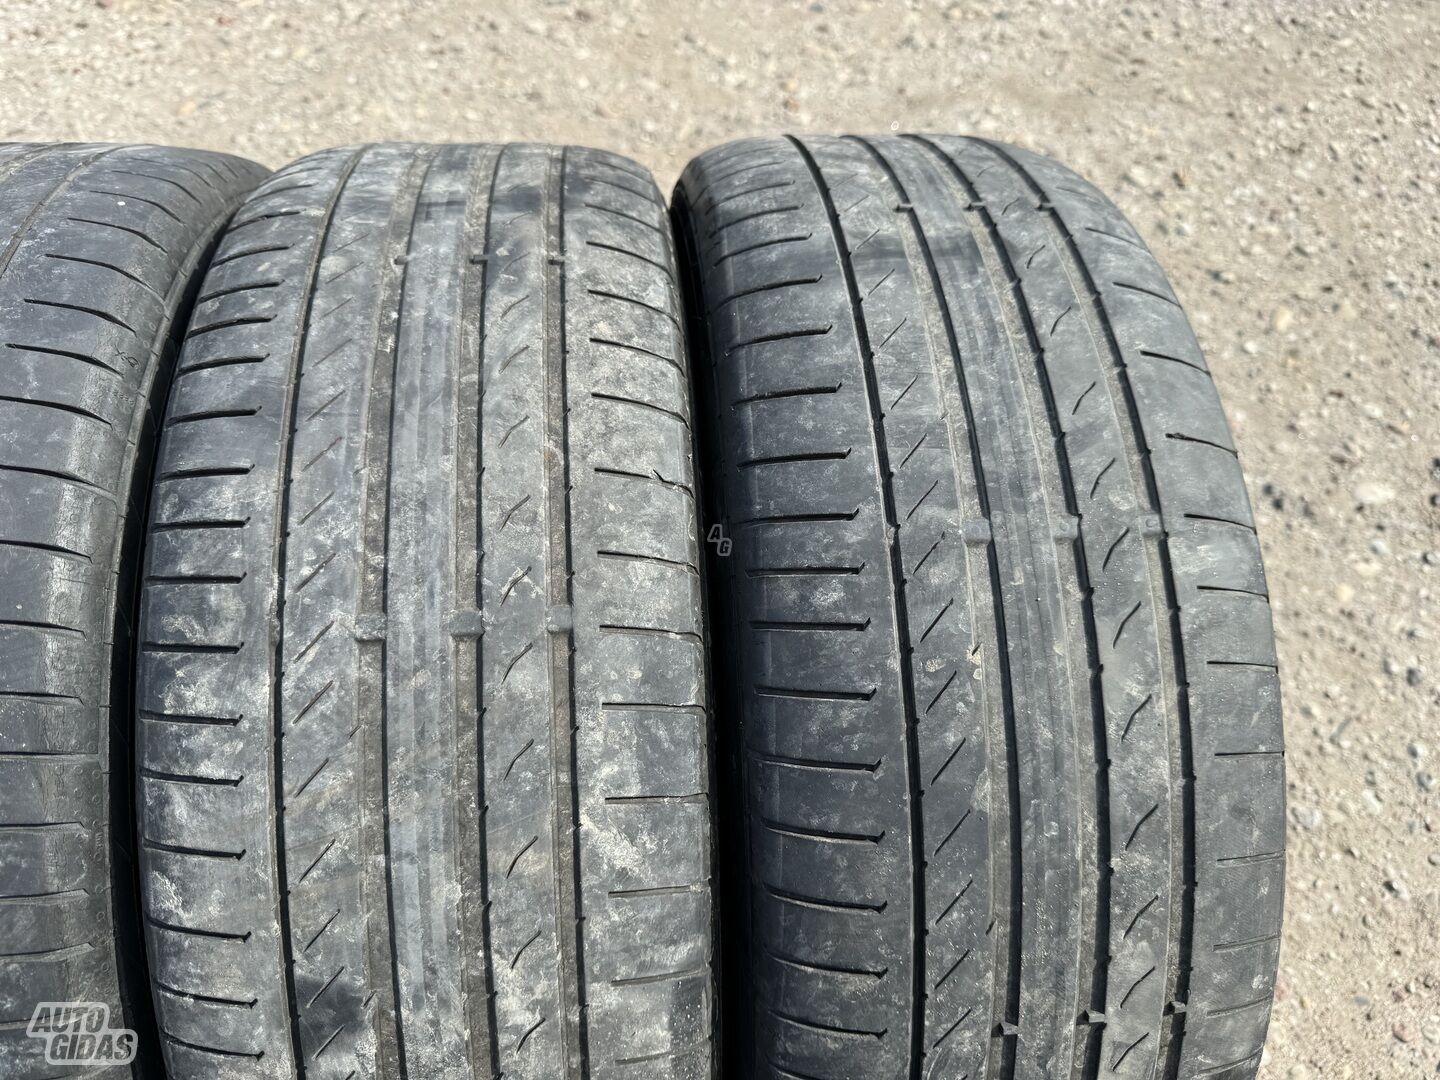 Continental Siunciam, 3-4mm R19 summer tyres passanger car